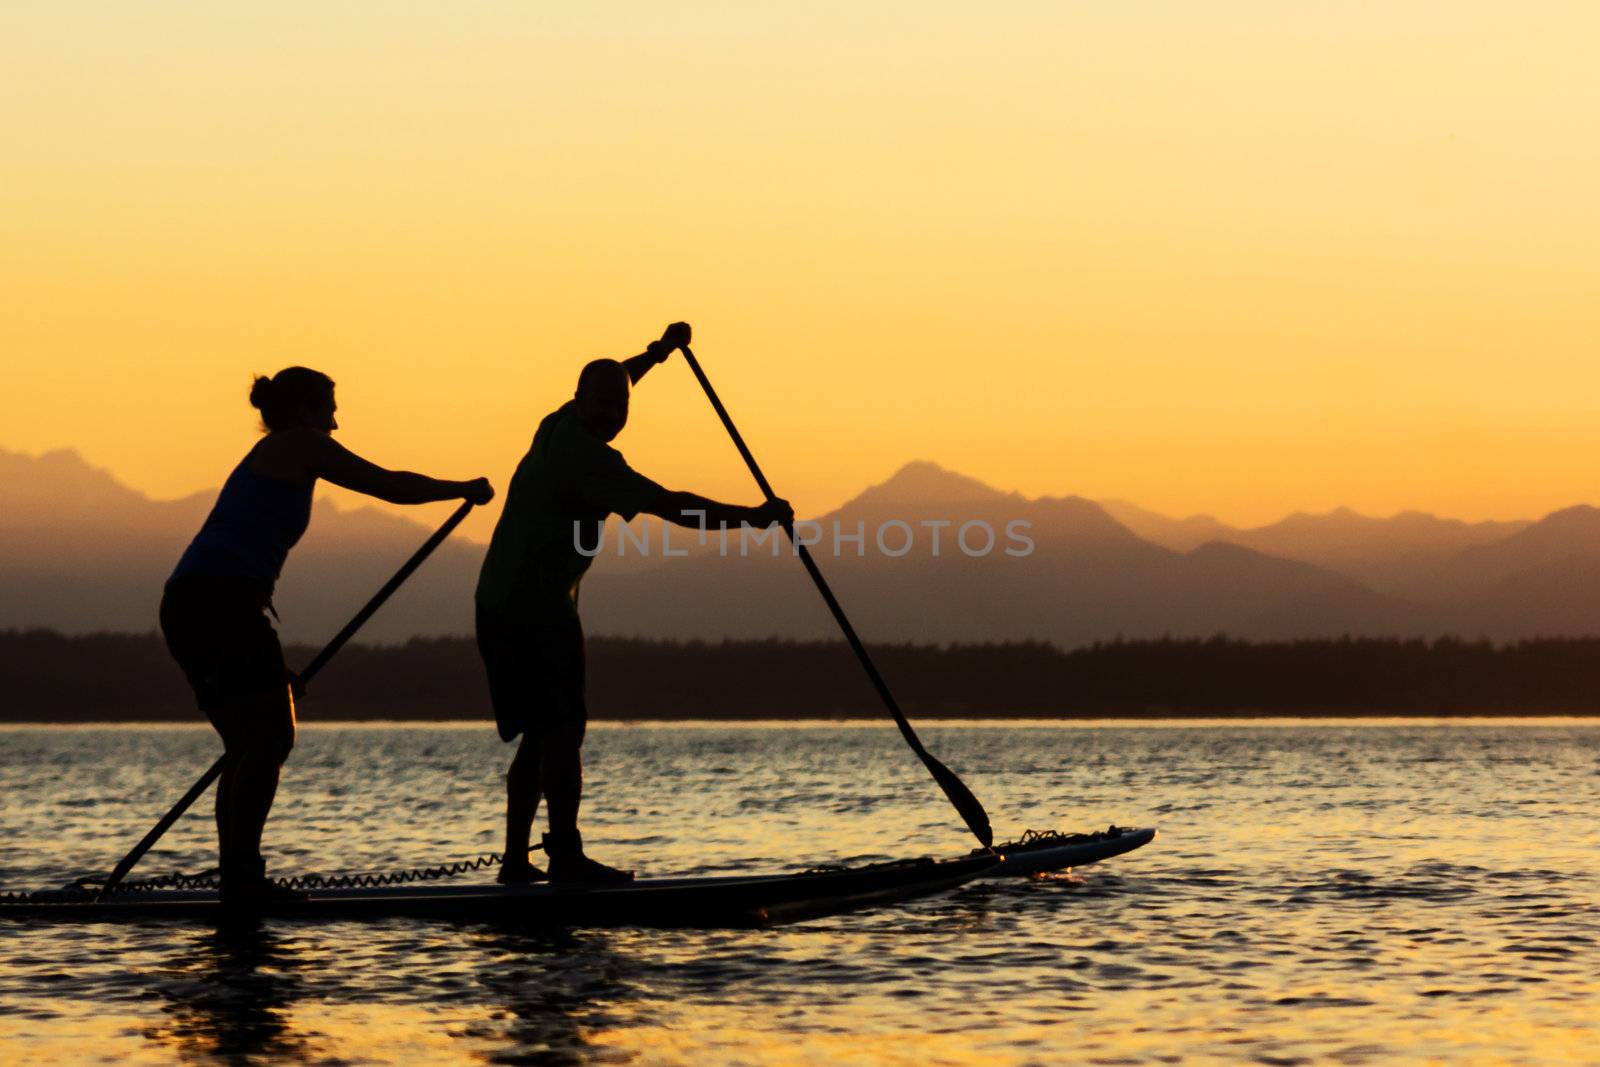 Couple paddling stand up paddle boards at sunset with mountains in background.